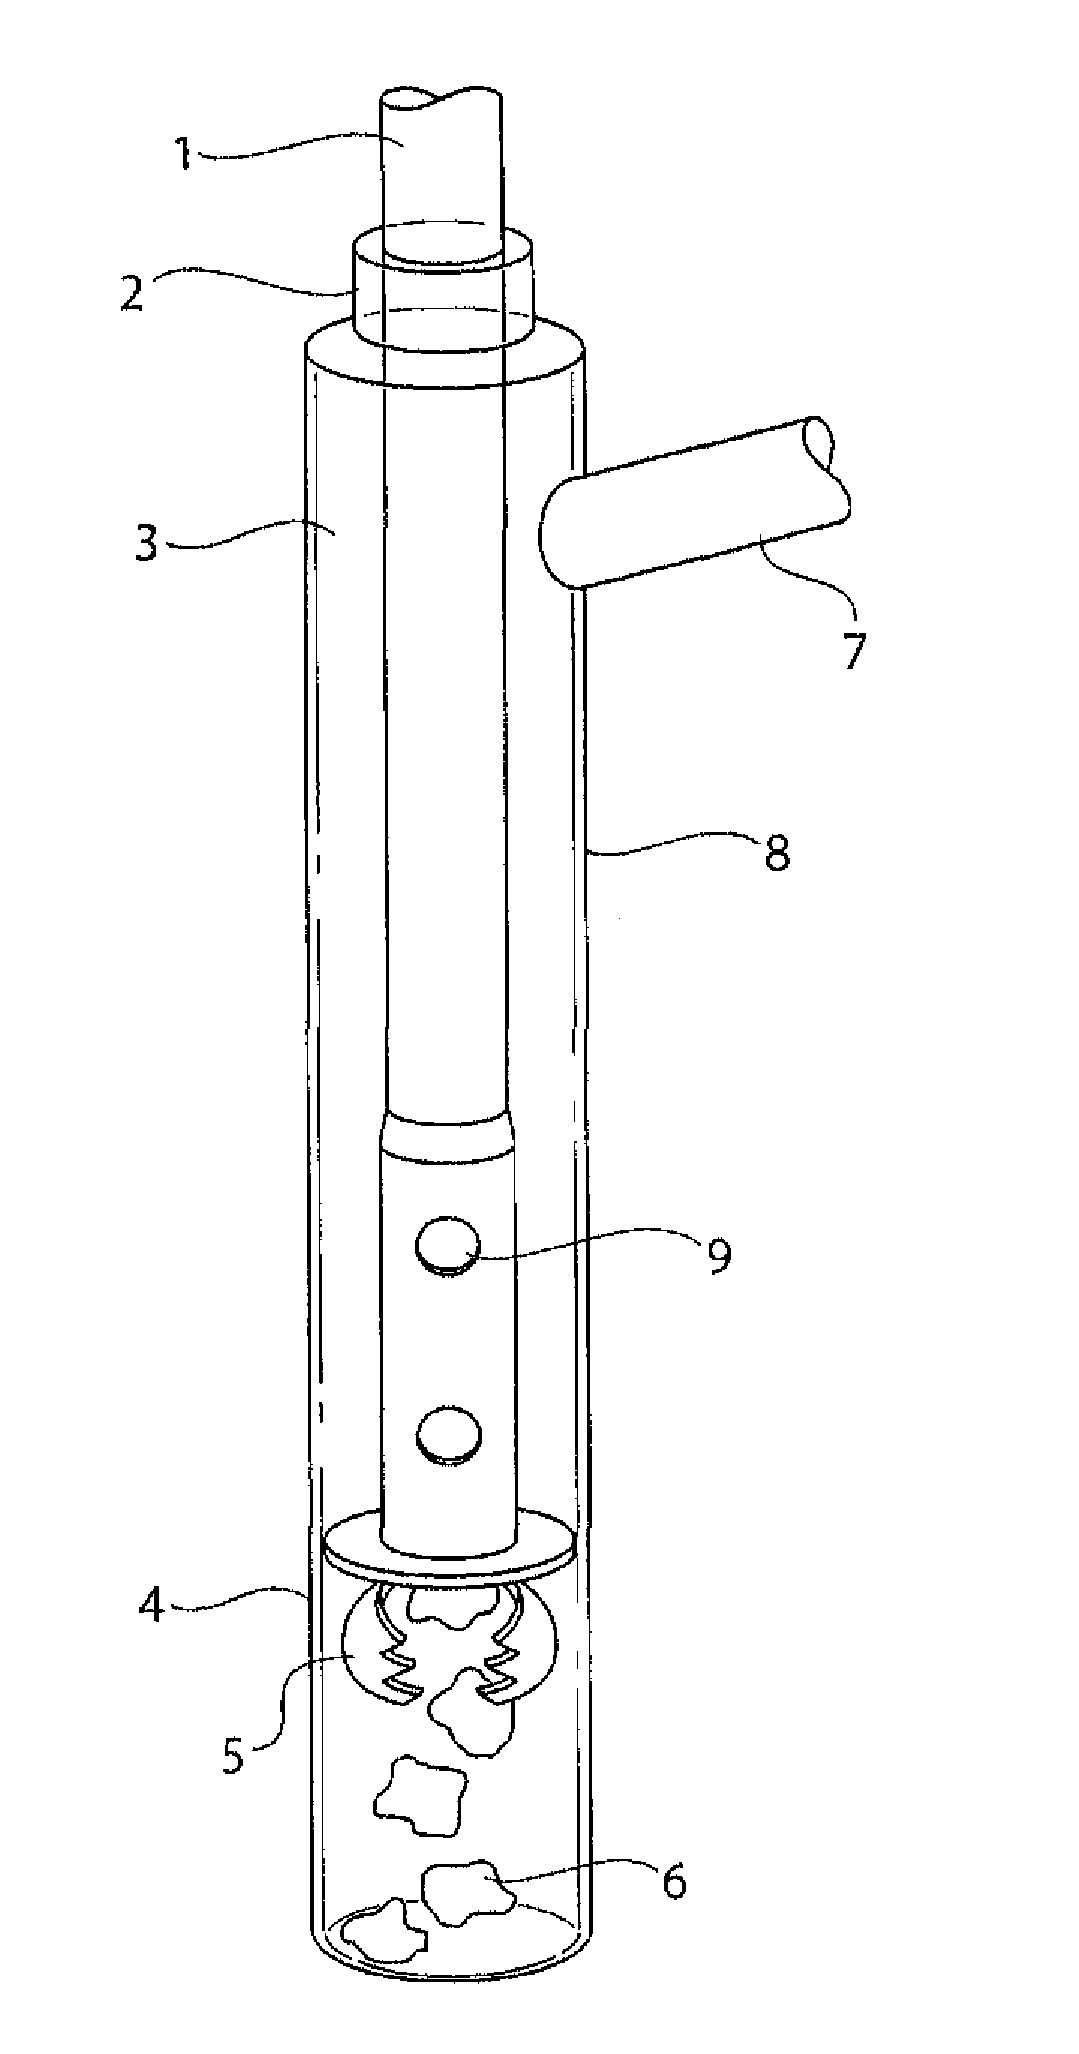 Apparatus and methods for removing and collecting biopsy specimens from biopsy devices with fixation and preparation for histopathological processing or other analysis